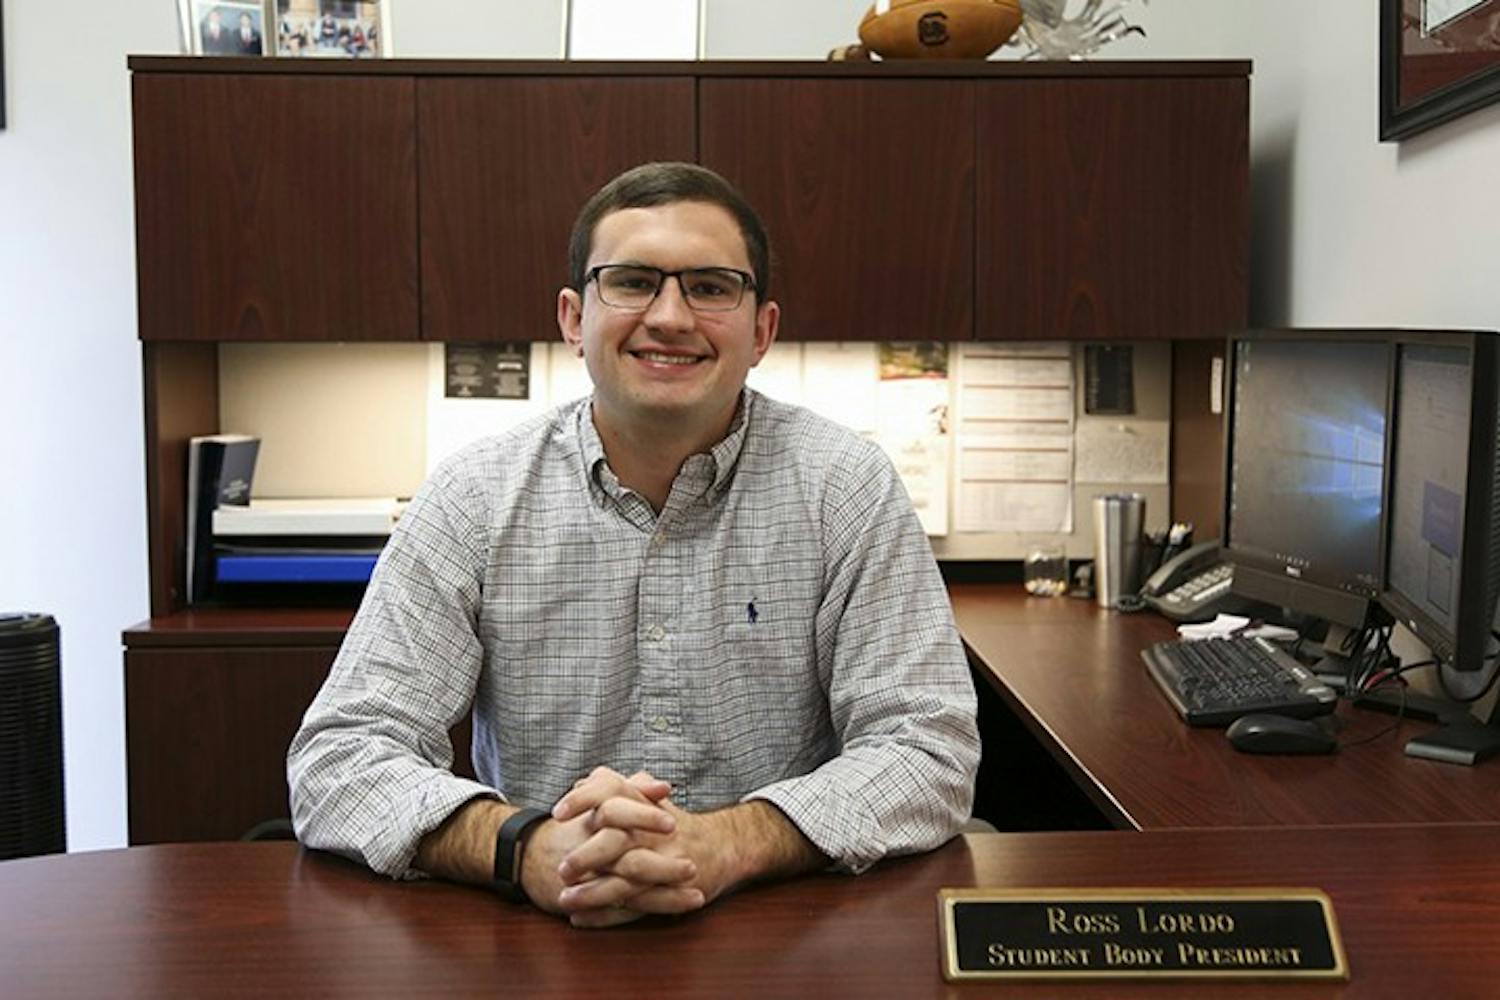 Former Student Body President Ross Lordo sits at his desk while his name plaque is displayed. In his letter, Lordo reflected on athletic achievements, the Cockstock concert and Dance Marathon.